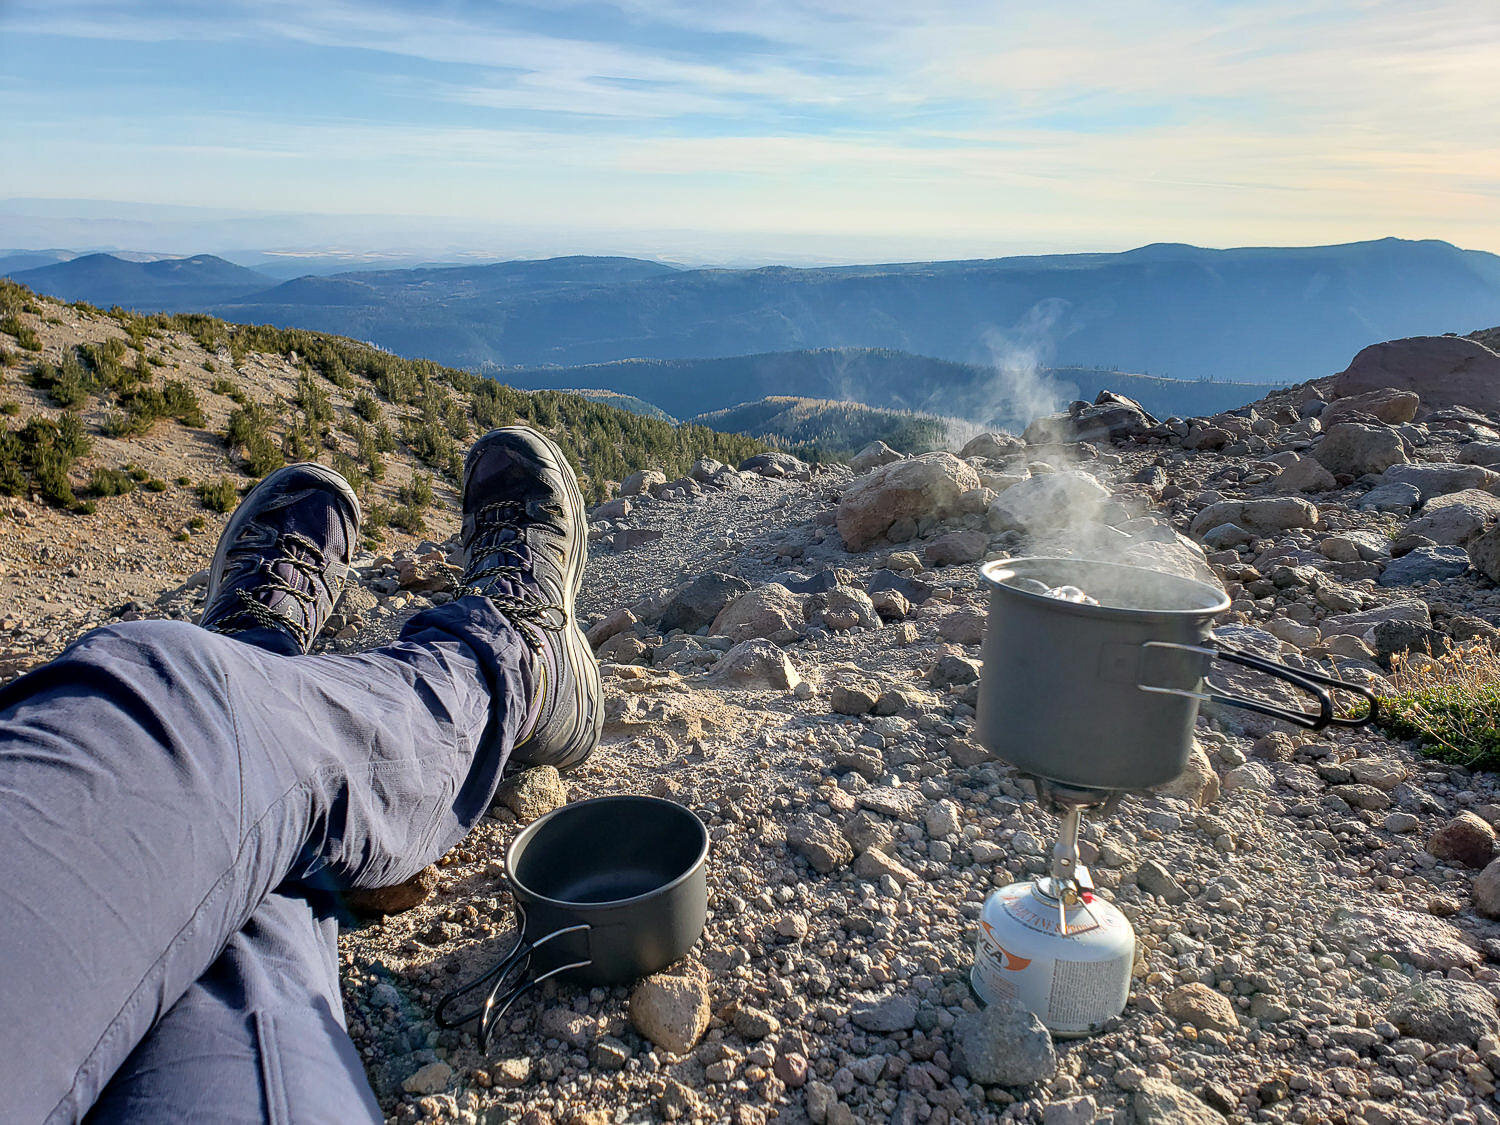 Water steaming over a backpacking stove with a view of the mountains in the background.